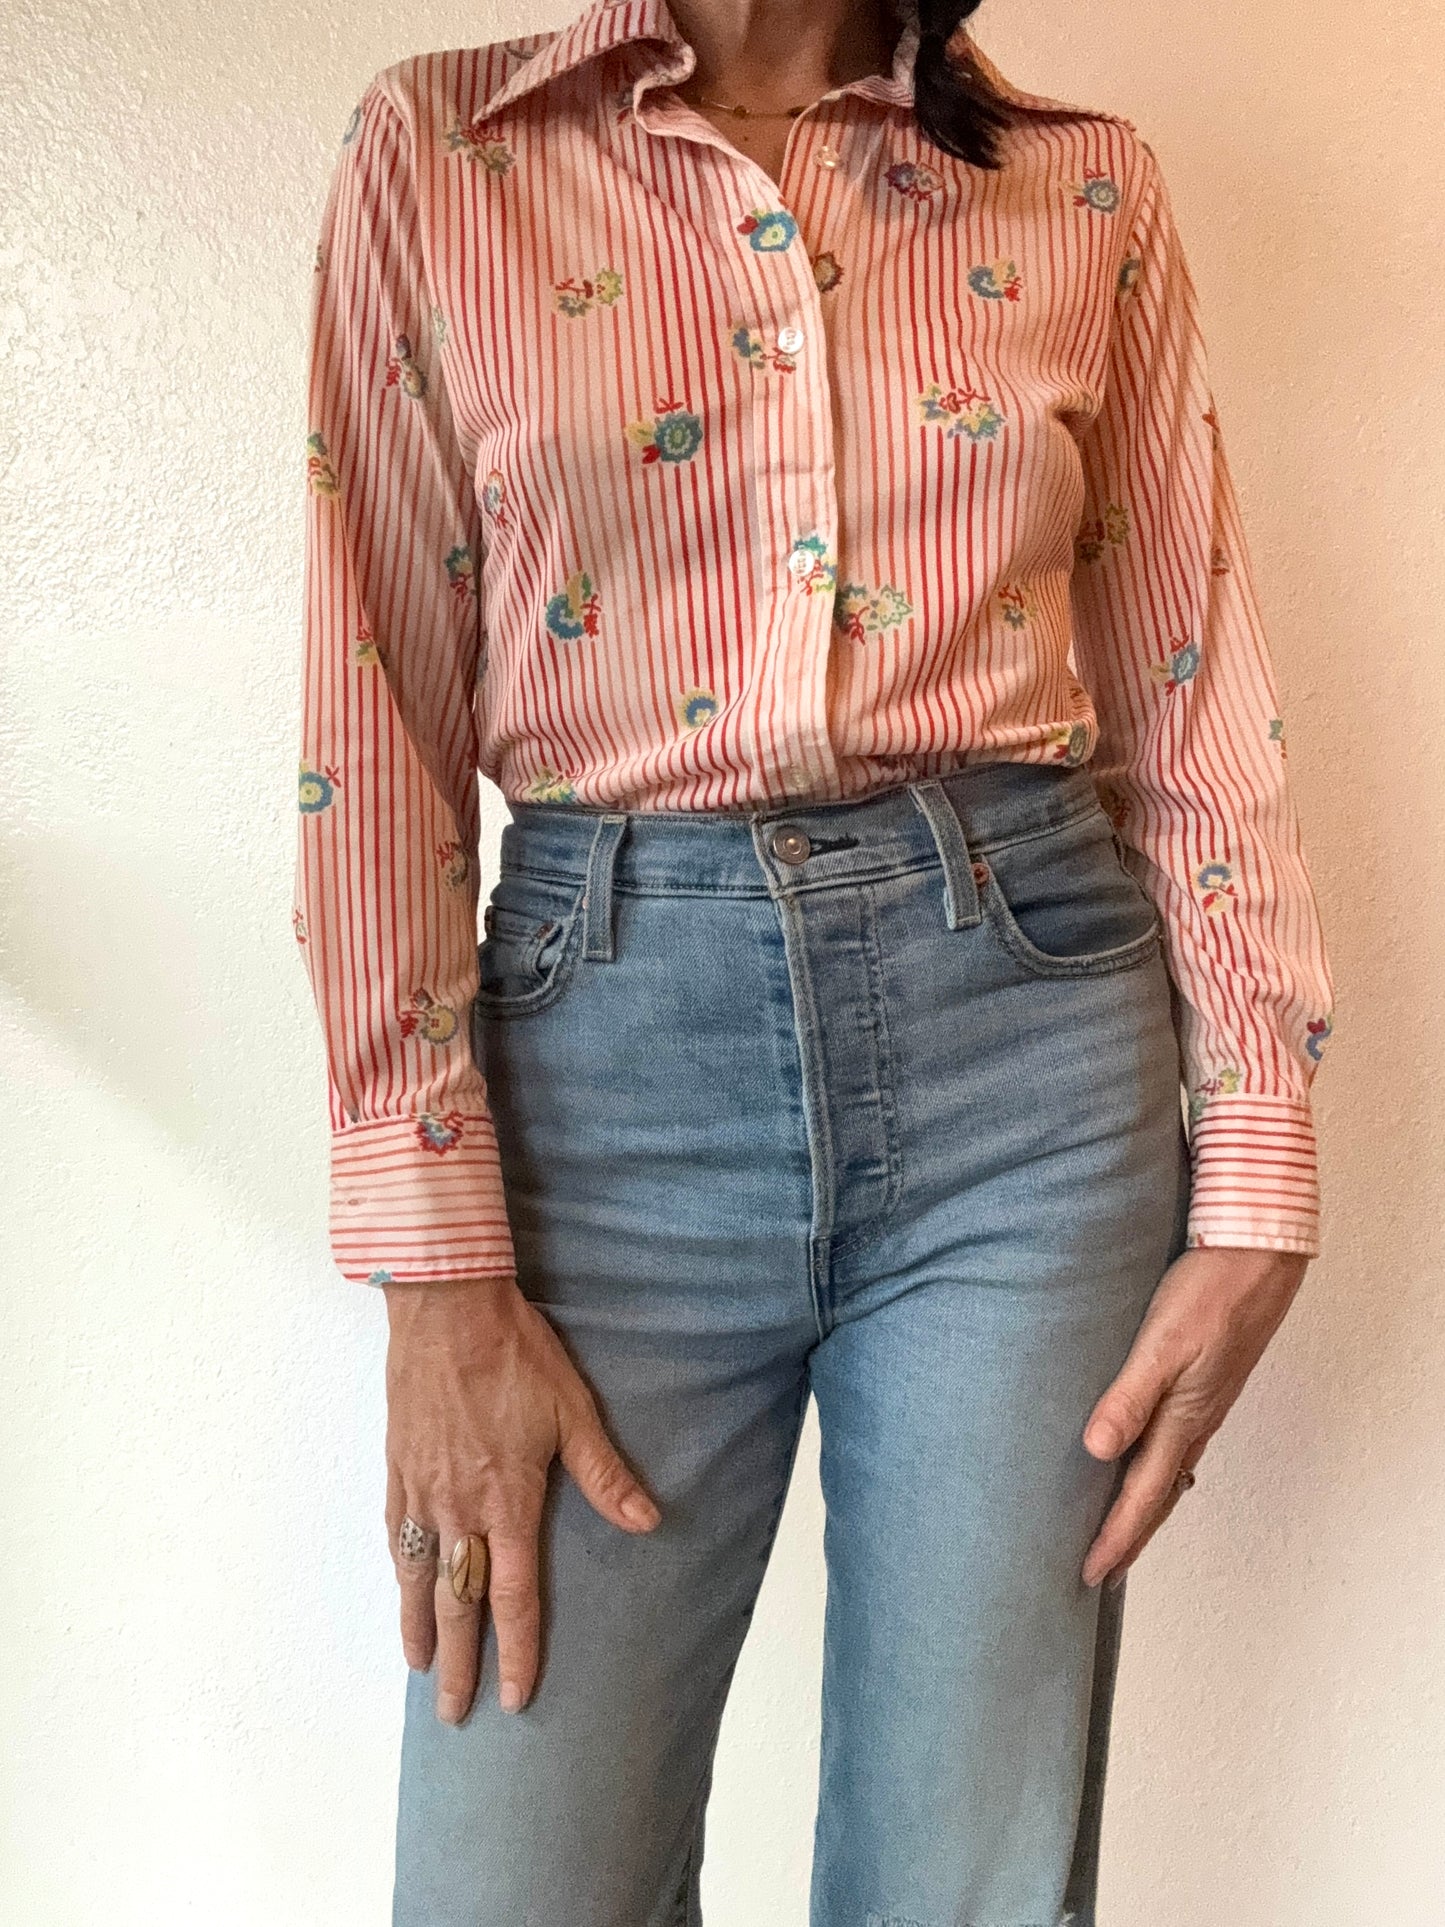 ‘College Town’ Striped Top